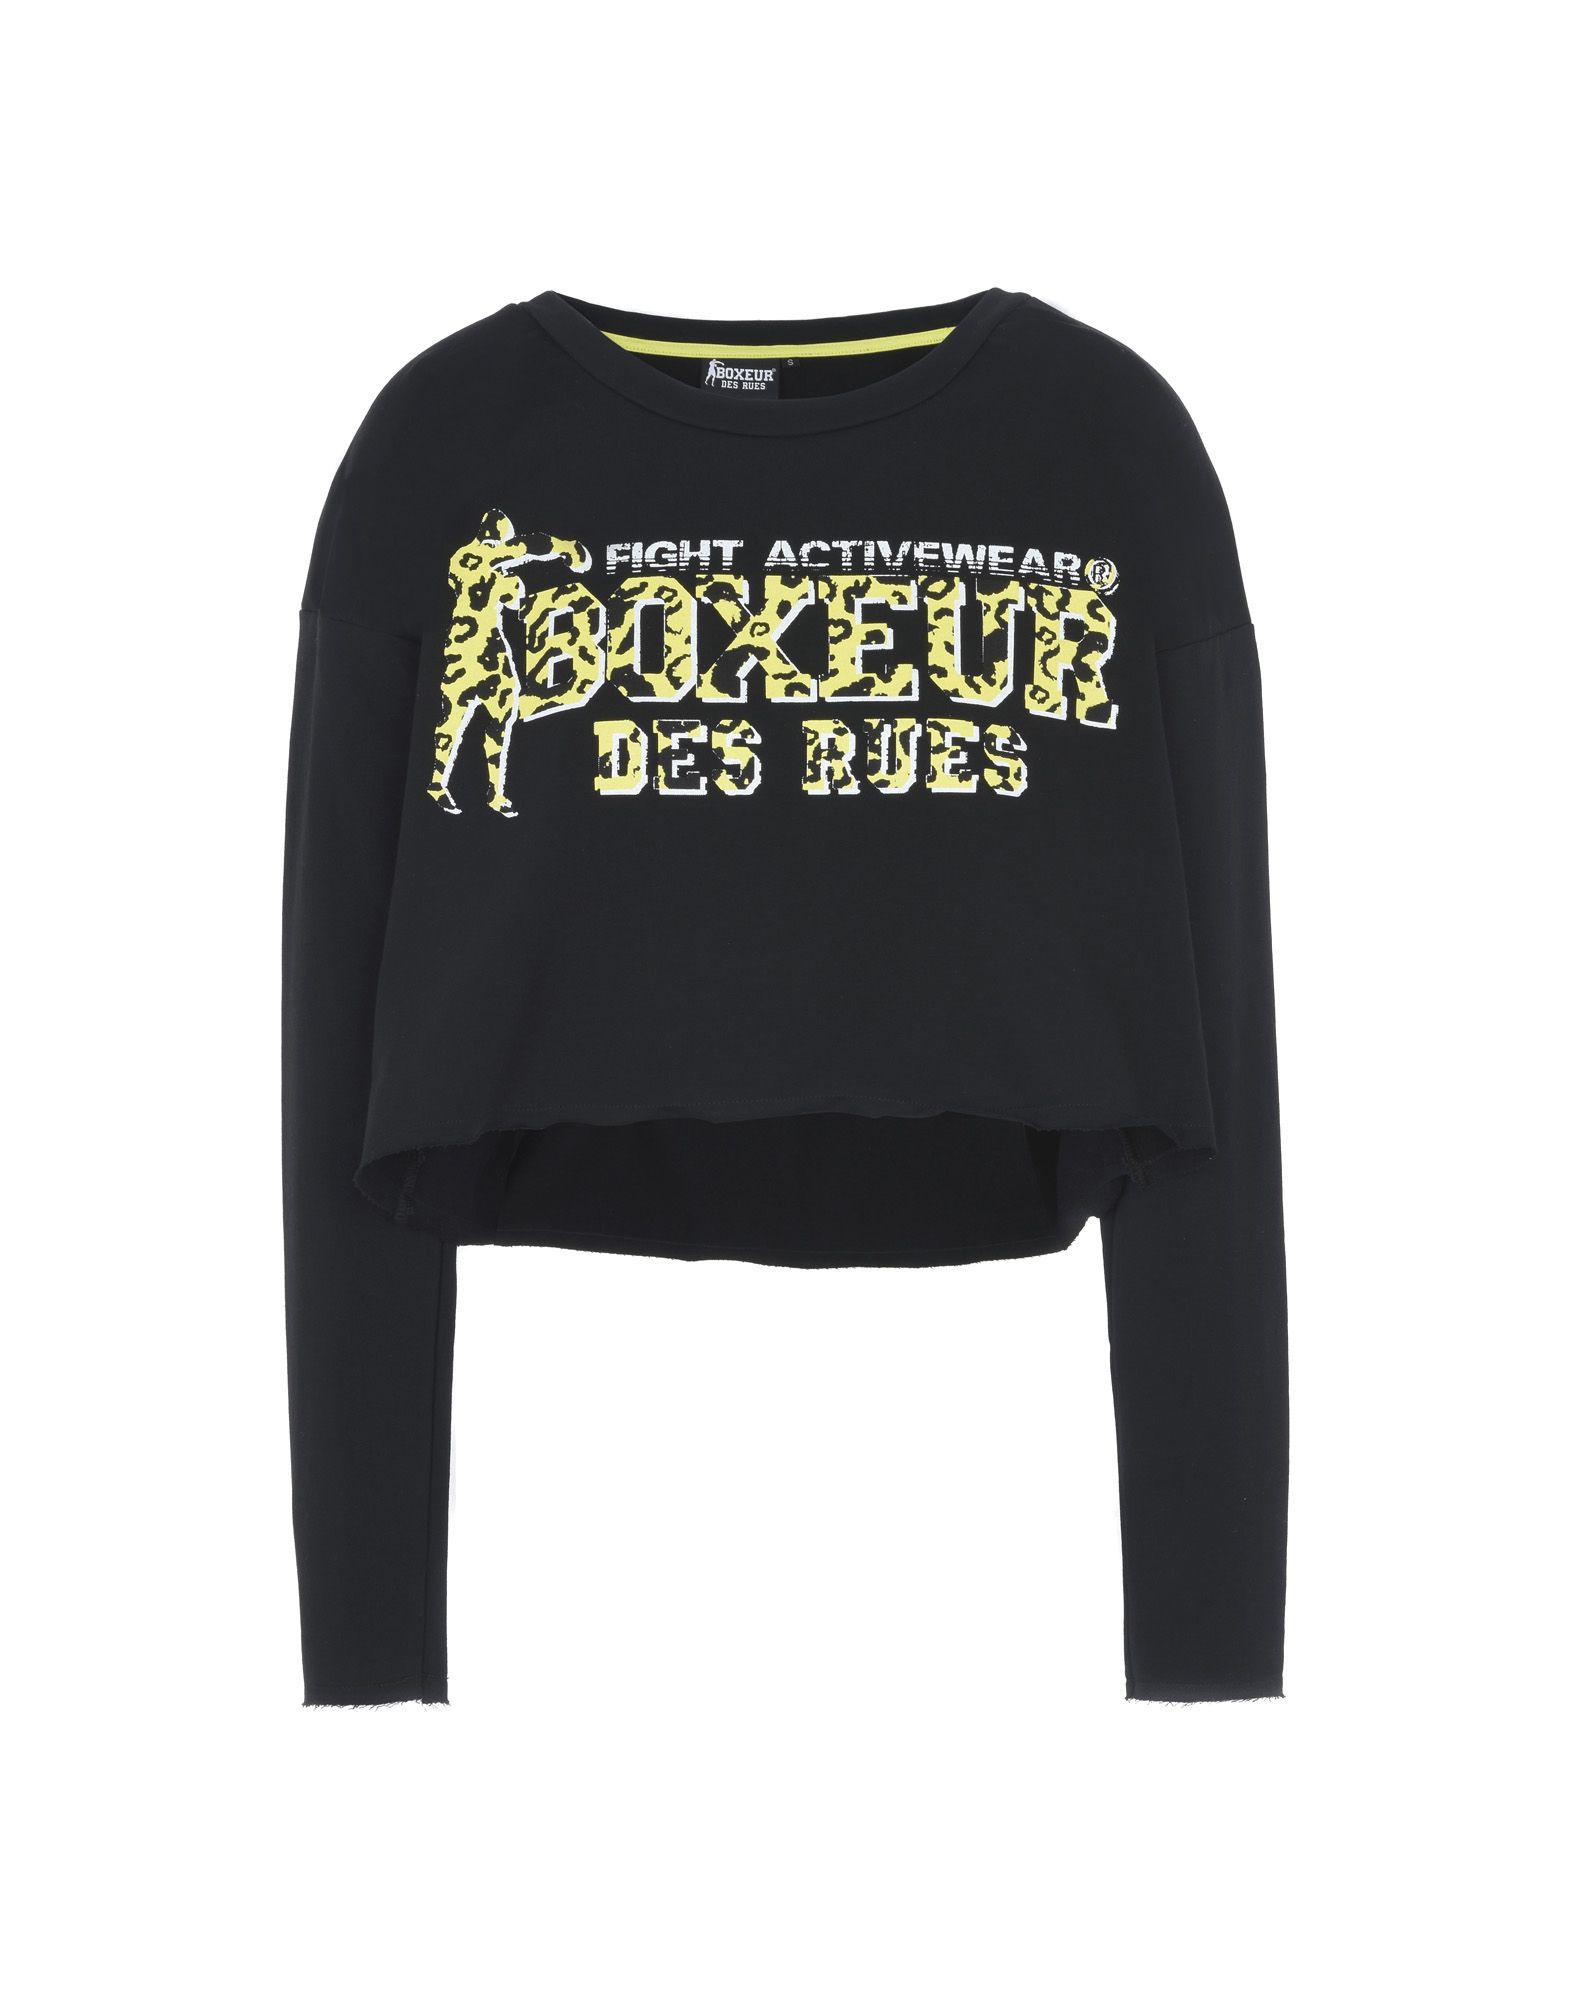 BOXEUR DES RUES Technical sweatshirts and sweaters,12167148JG 7